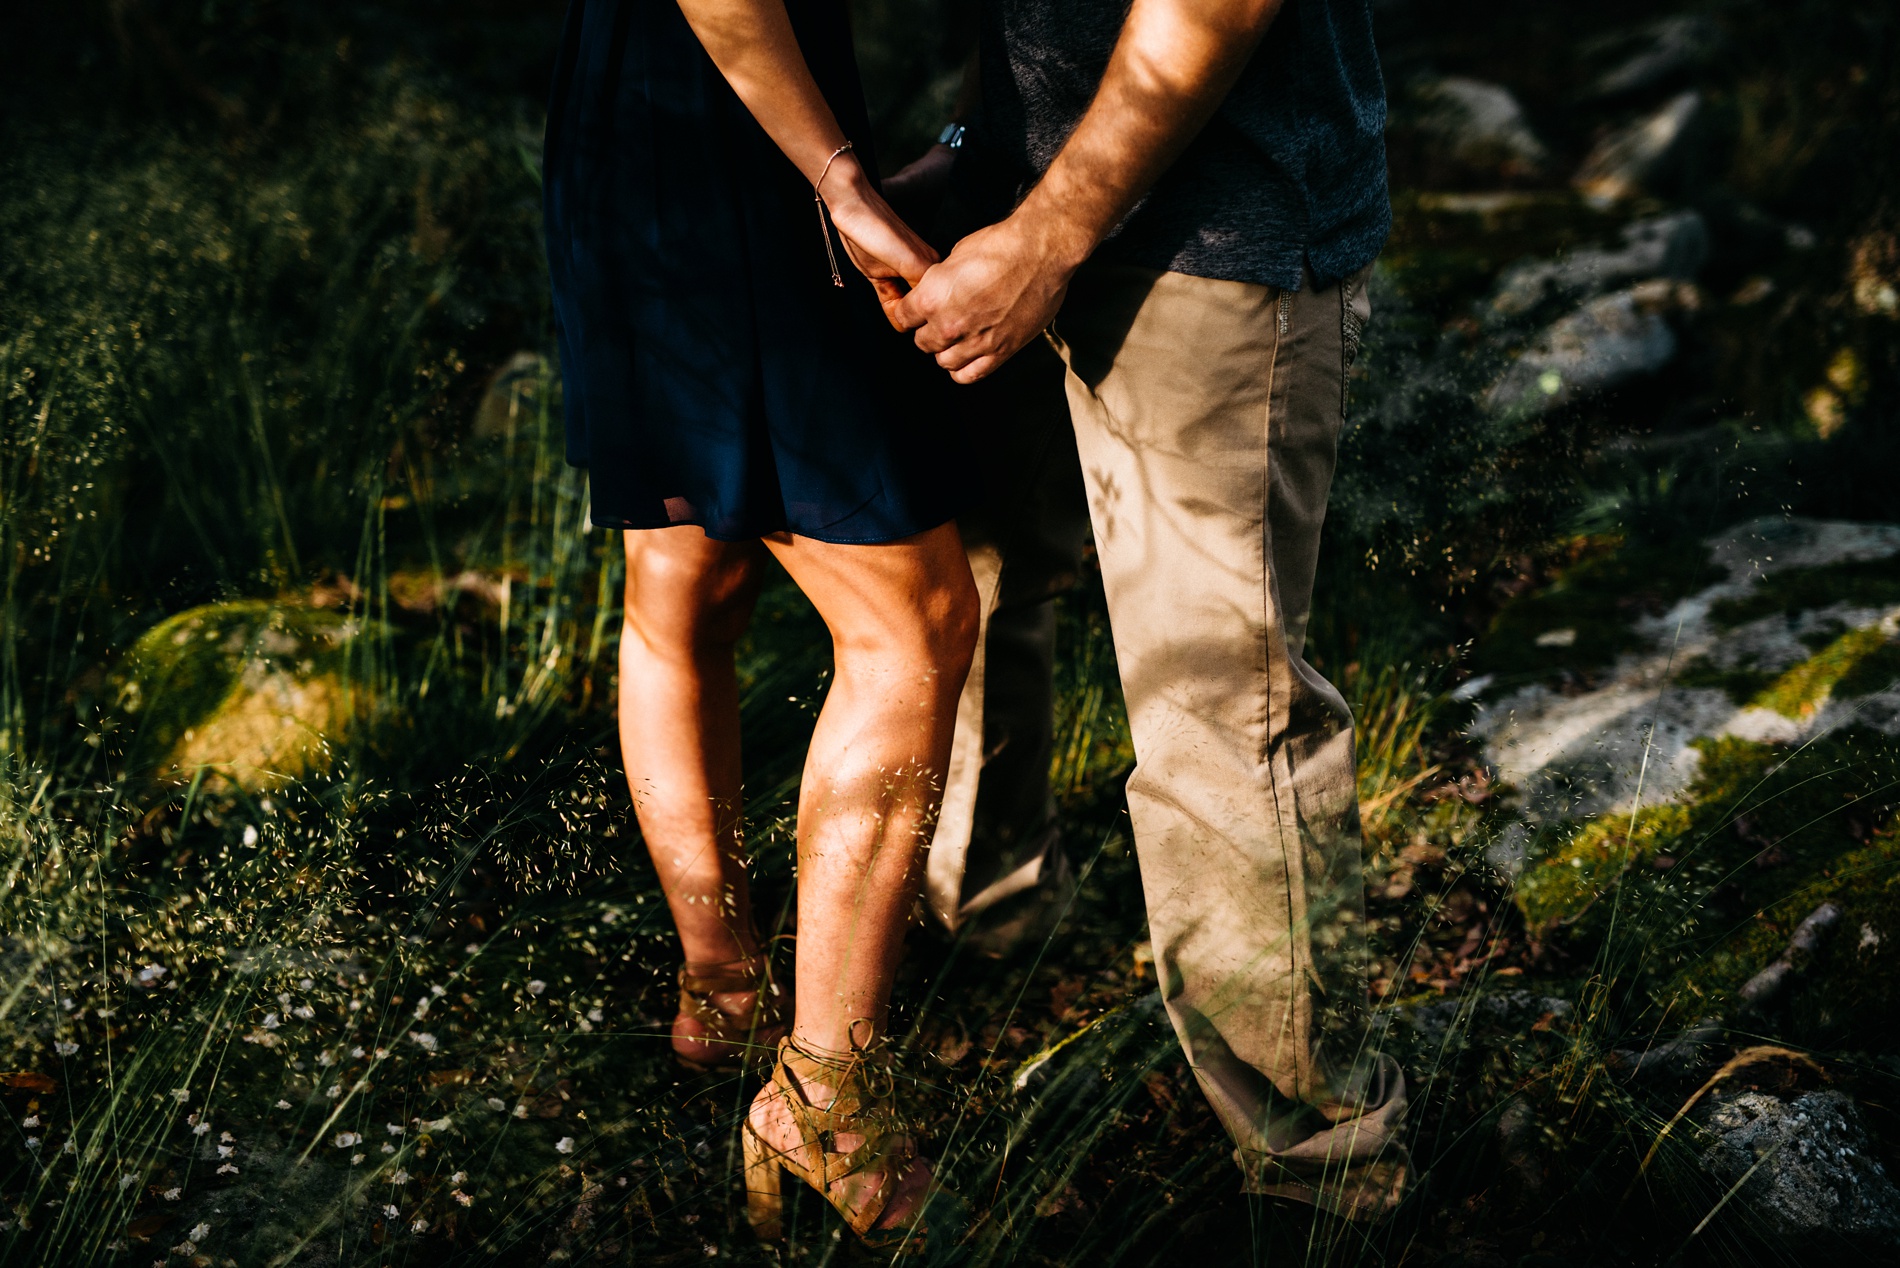 engagement photographers in wv